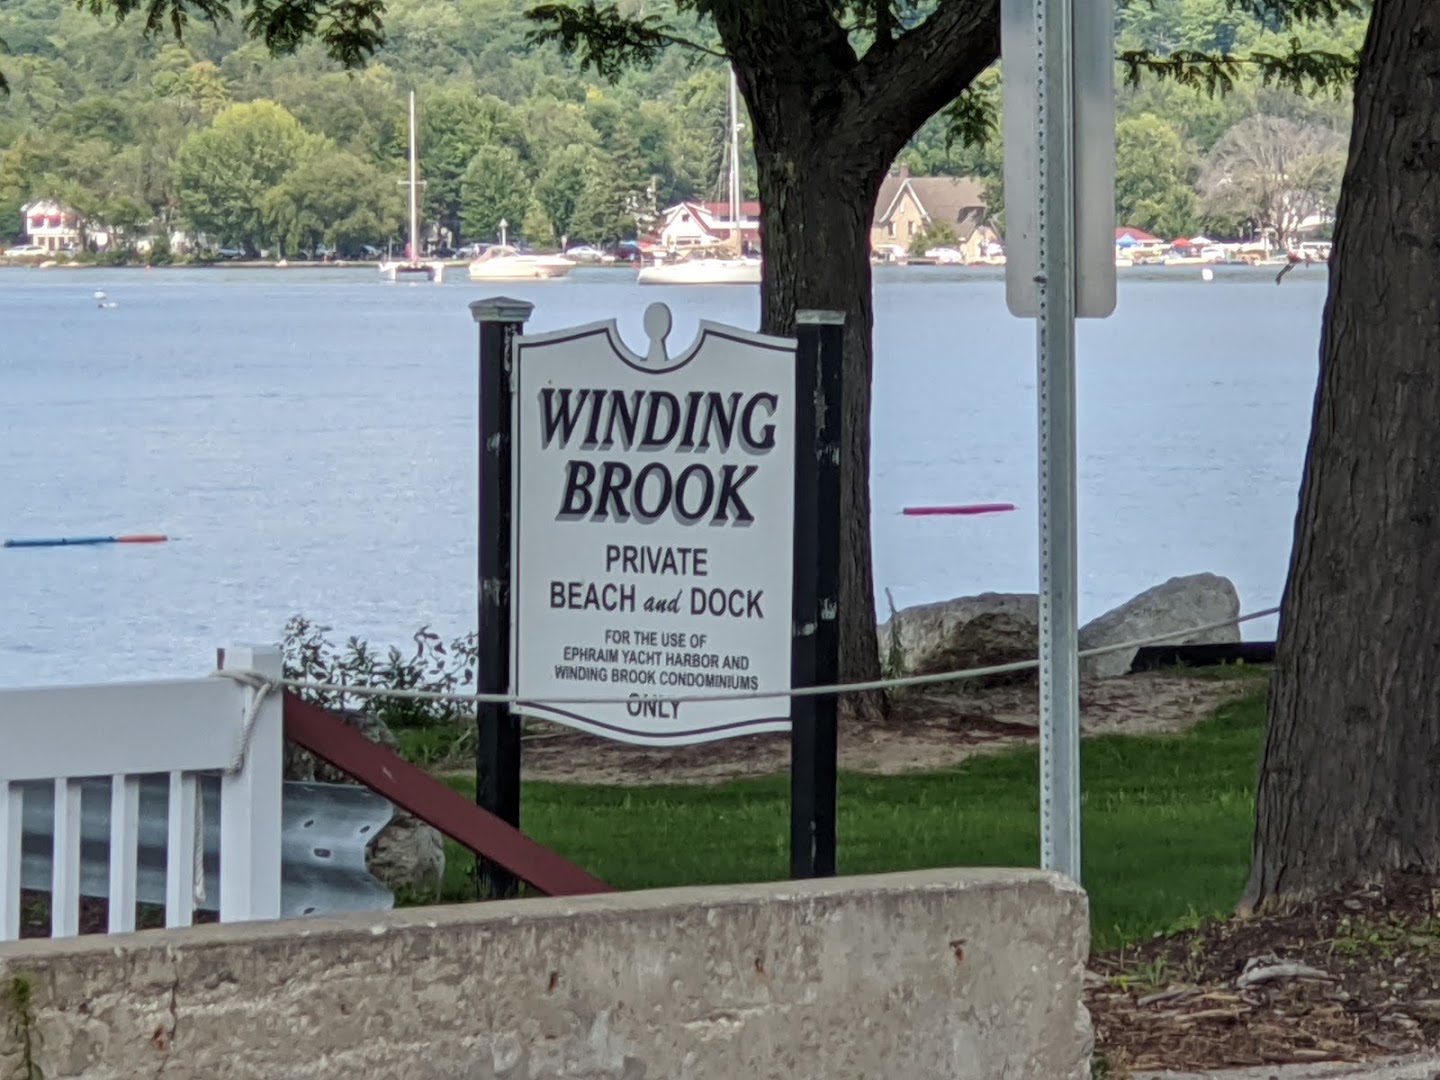 Winding Brook Private Beach and Dock